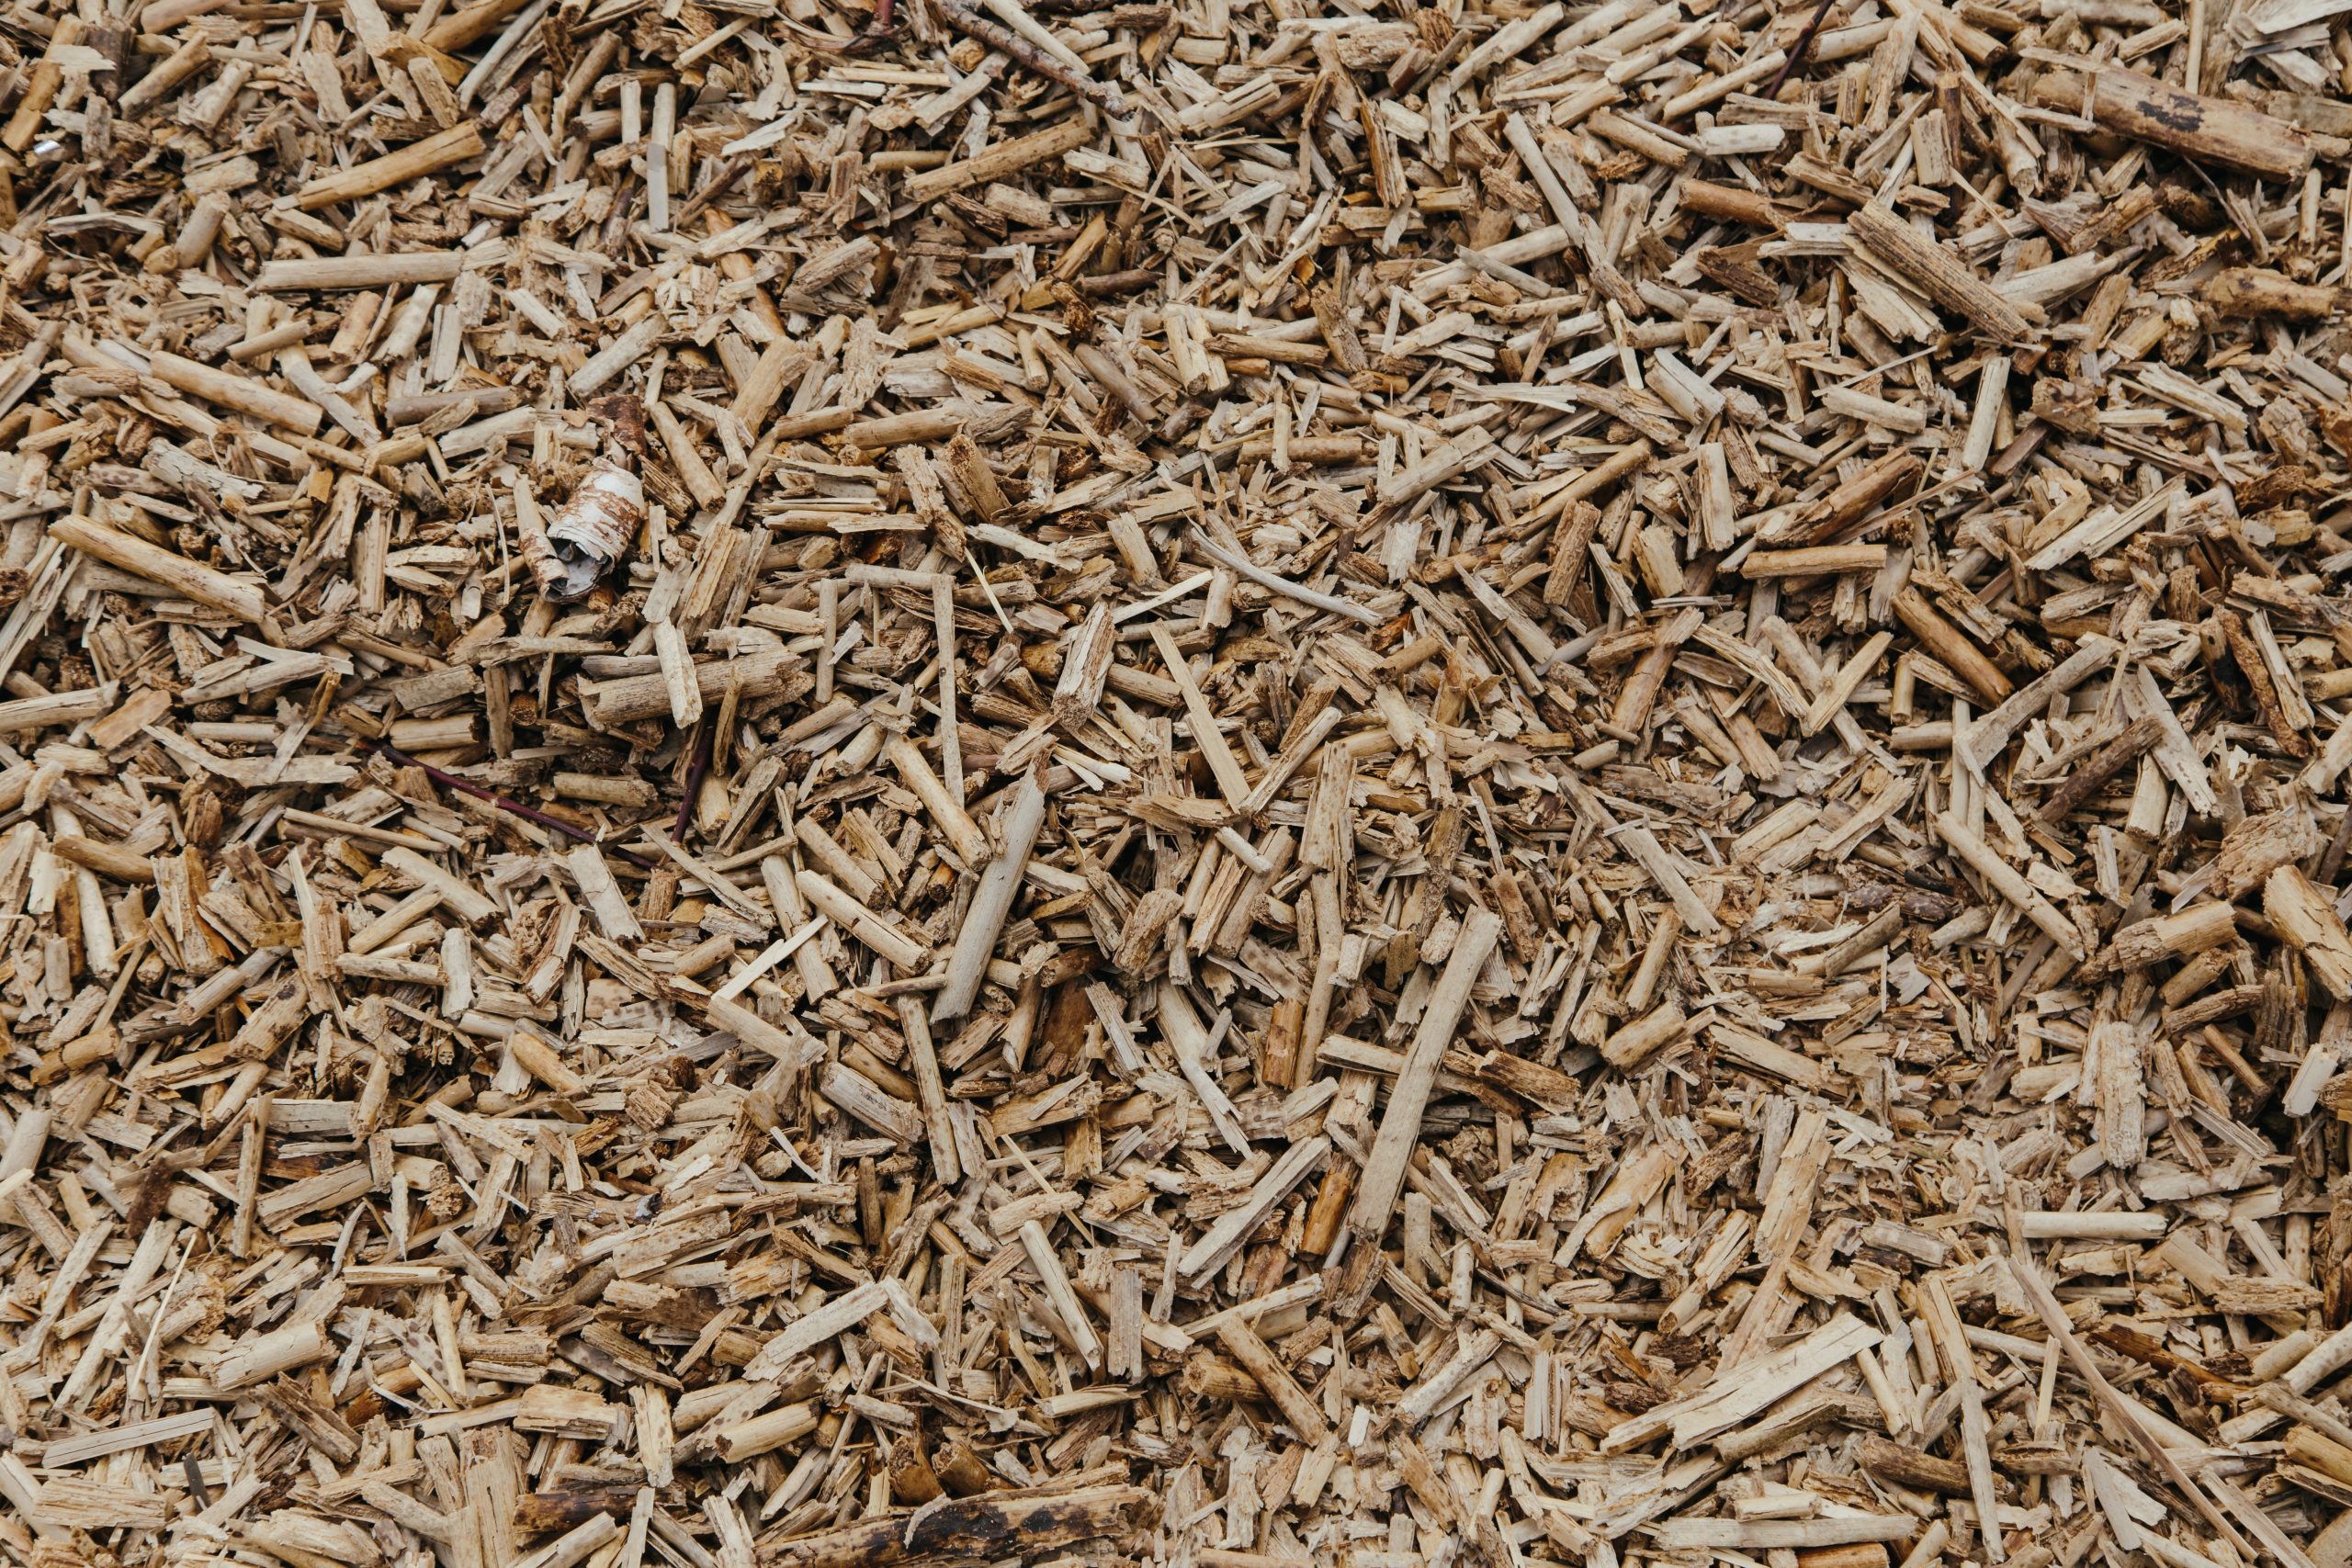 How To Make Wood Chips Manually For Smoking?